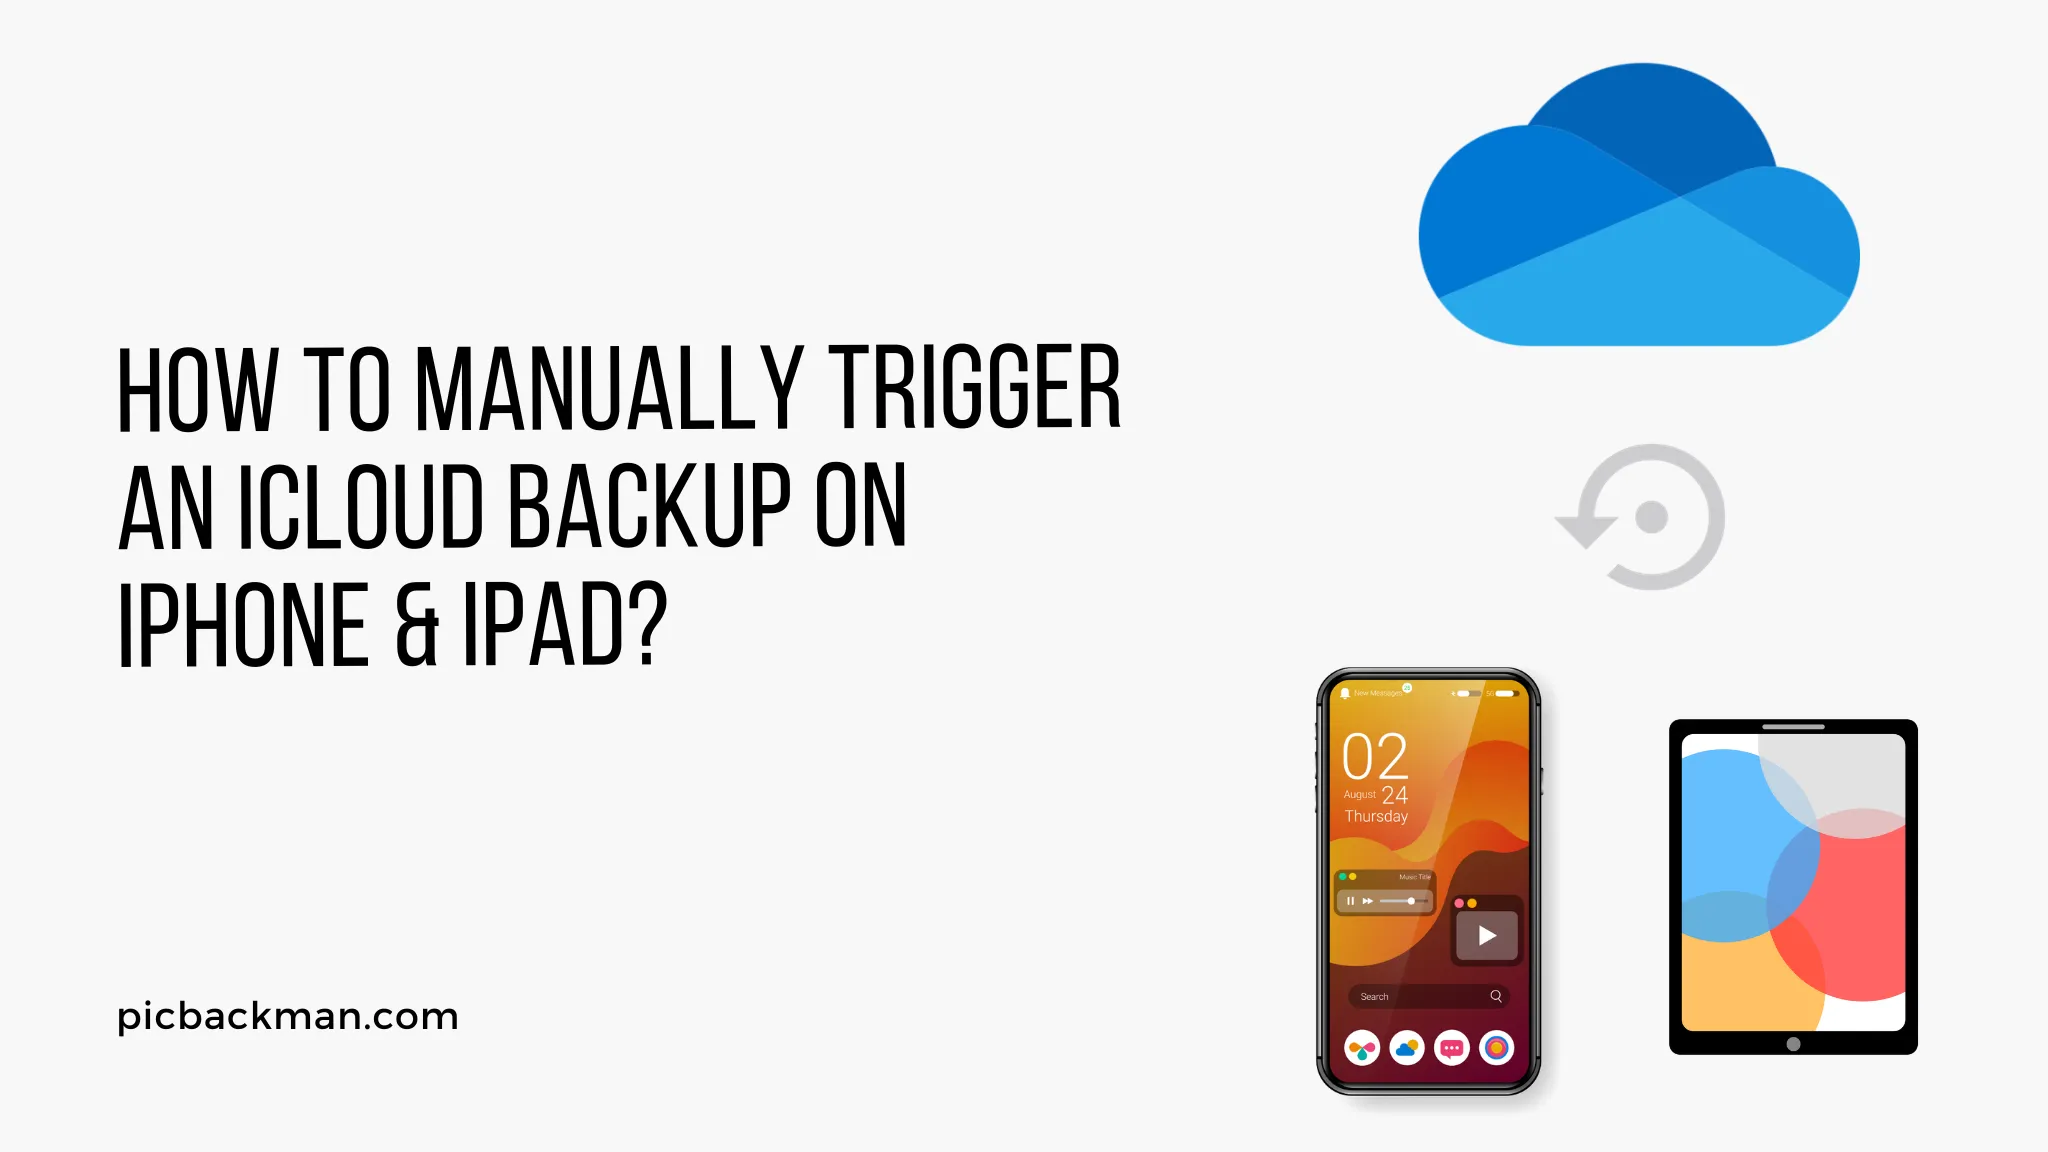 How to Manually Trigger an iCloud Backup on iPhone and iPad?